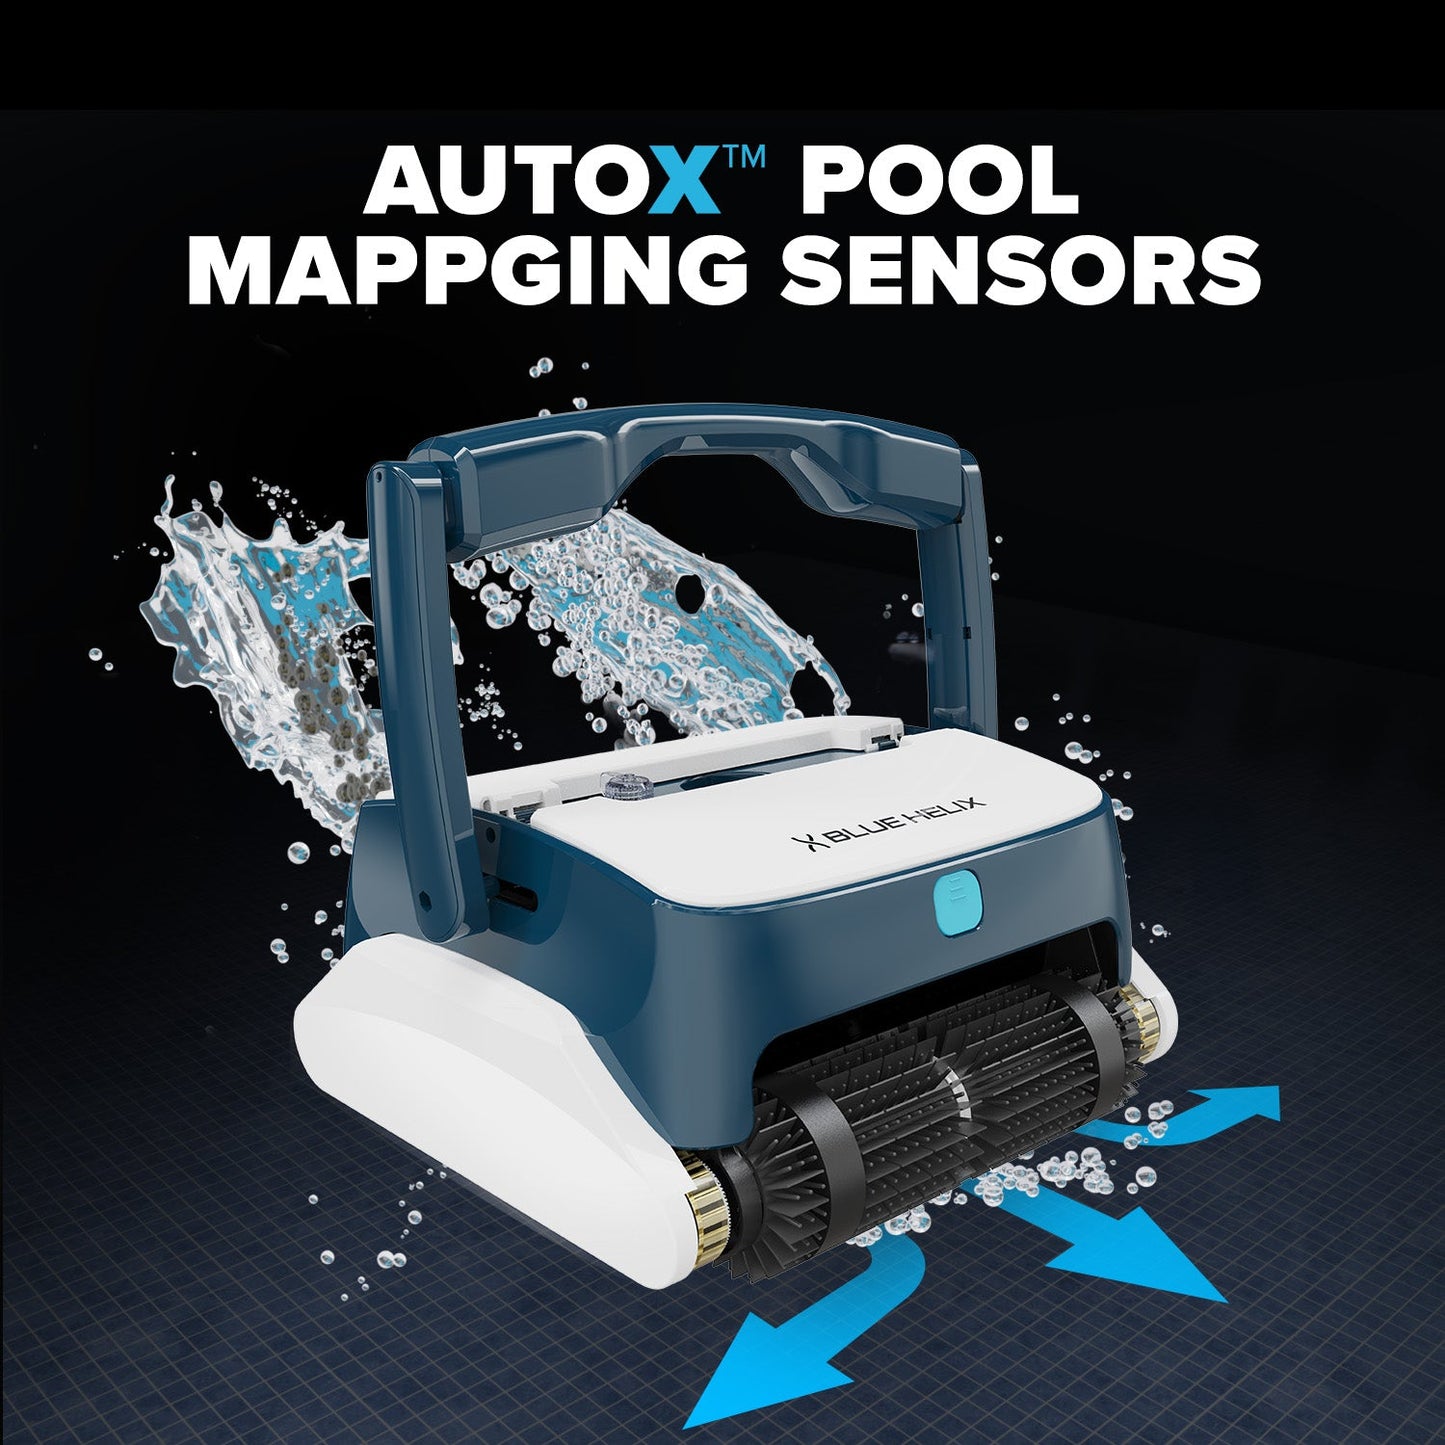 Blue Helix Robotic Pool Cleaner with Smartphone App, Dual Oversized Filters, Waterline Cleaning, Focus Mode, & AutoX Pool Mapping